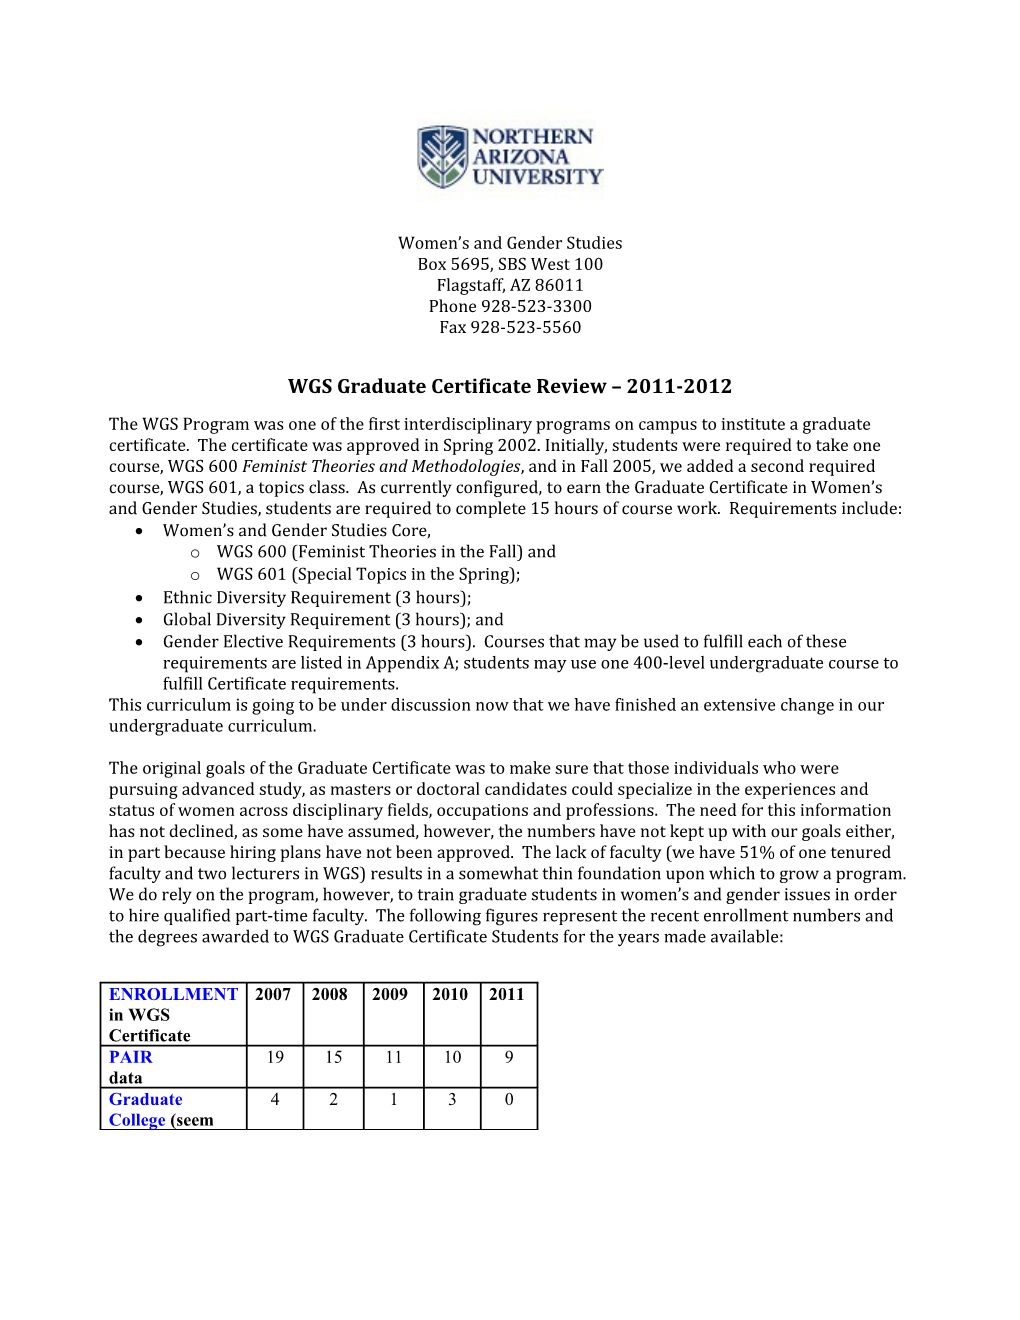 WGS Graduate Certificate Review 2011-2012